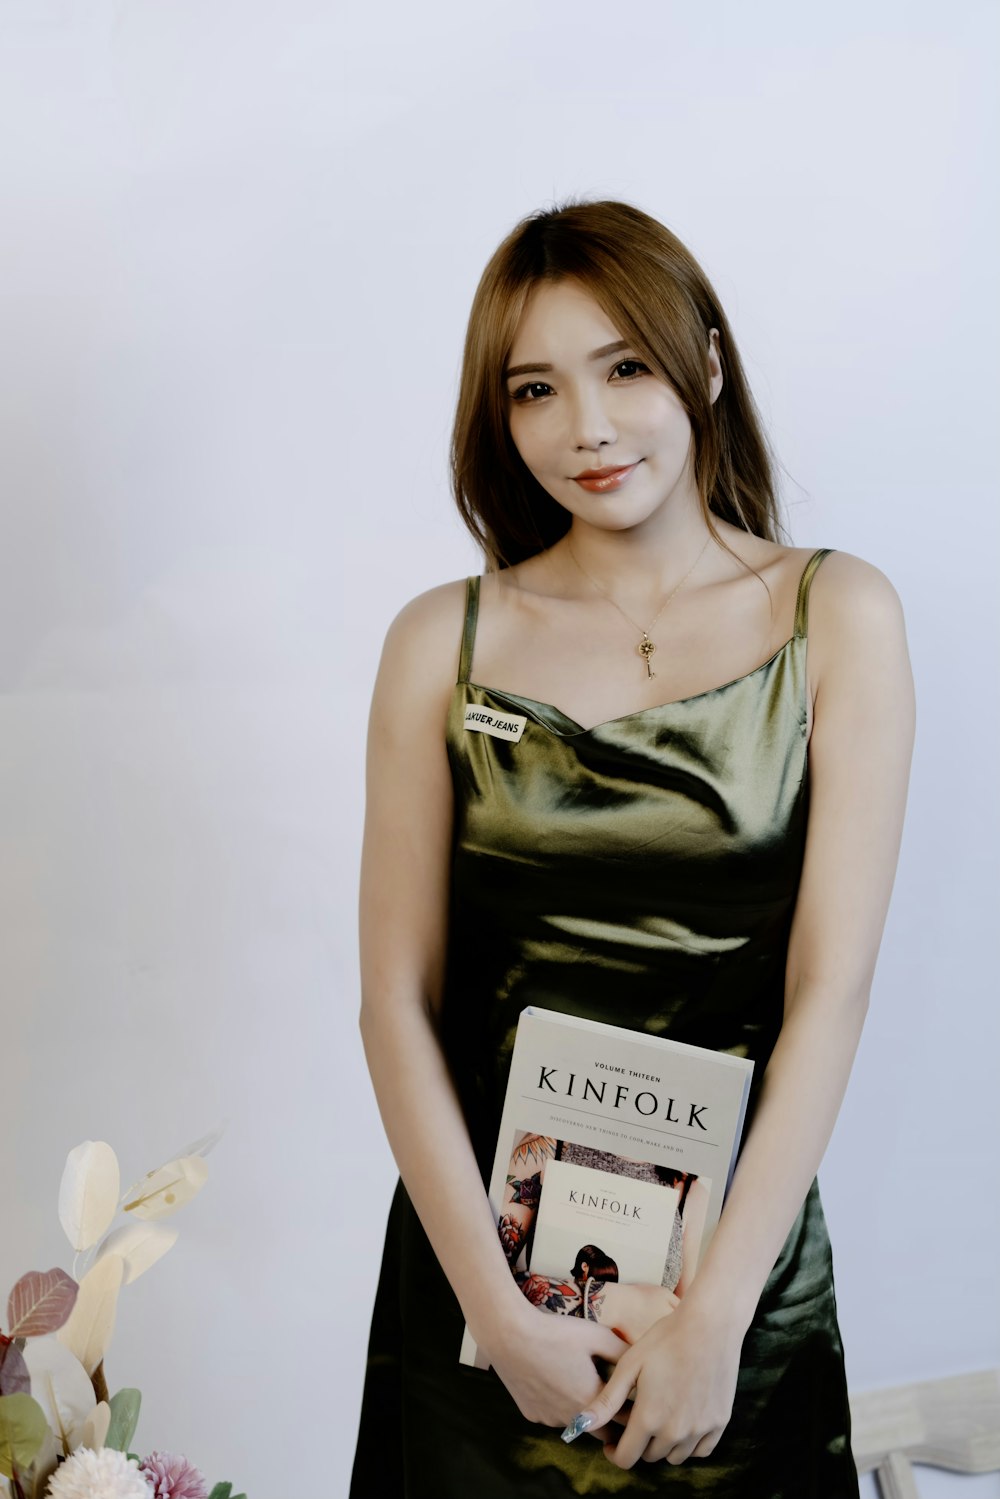 a woman in a green dress holding a book